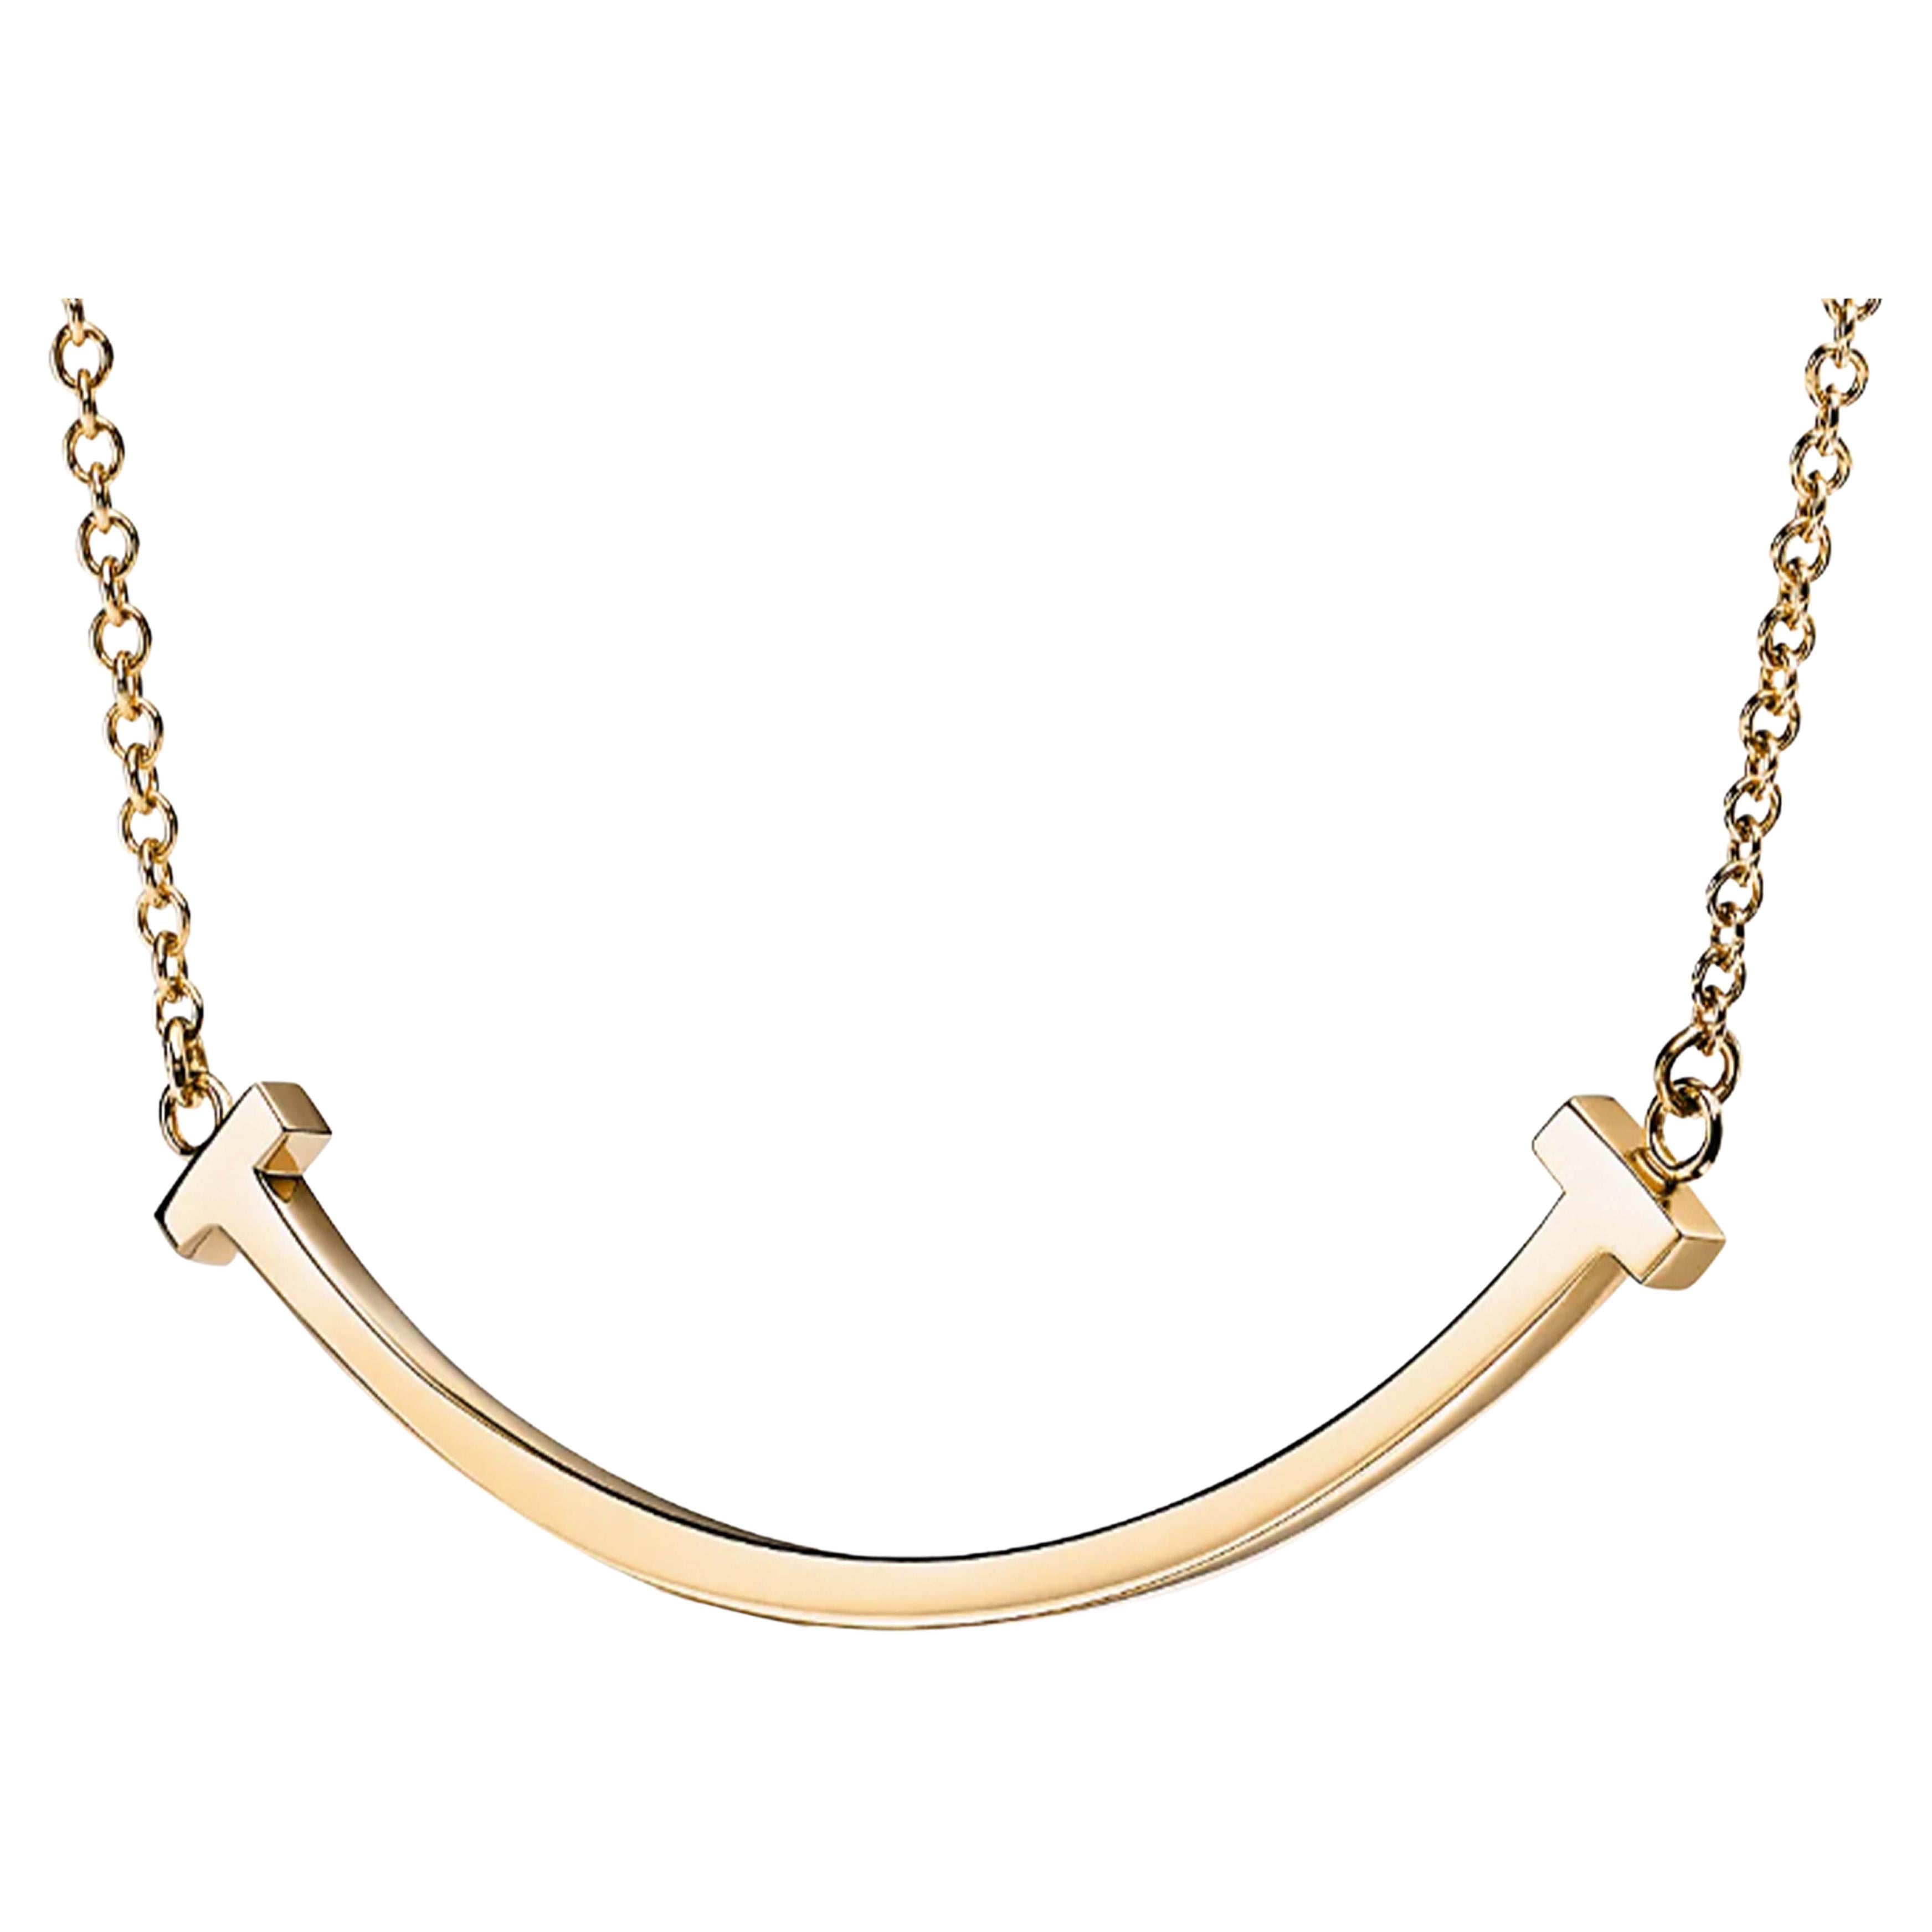 Tiffany T Smile Pendant Necklace in 18k Yellow Gold, Small